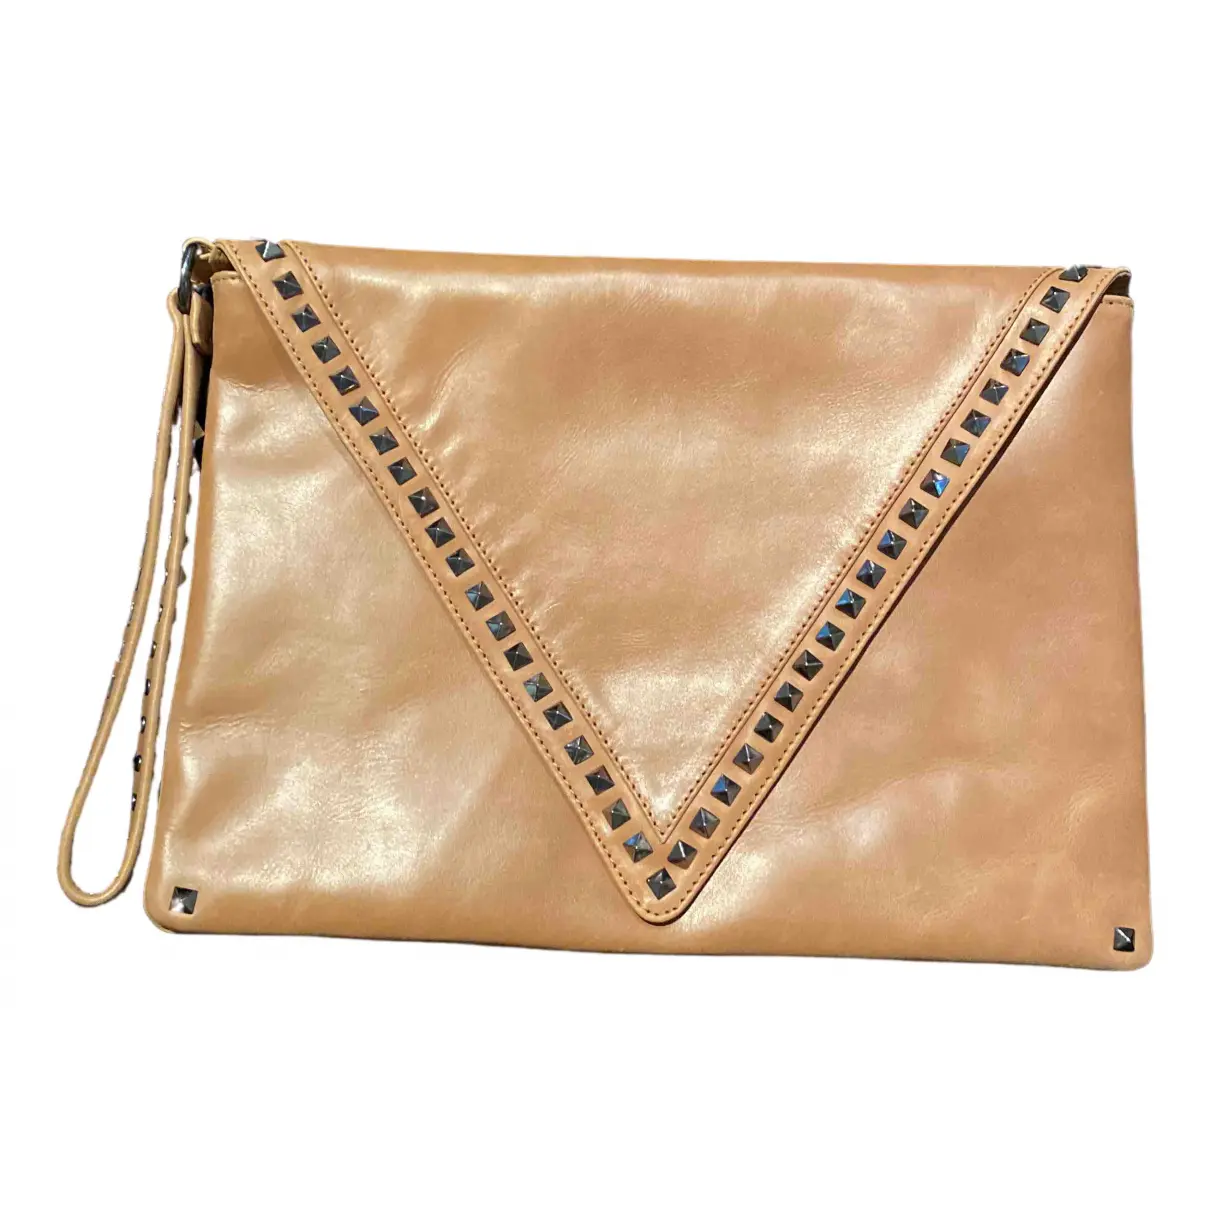 Leather clutch bag The Kooples